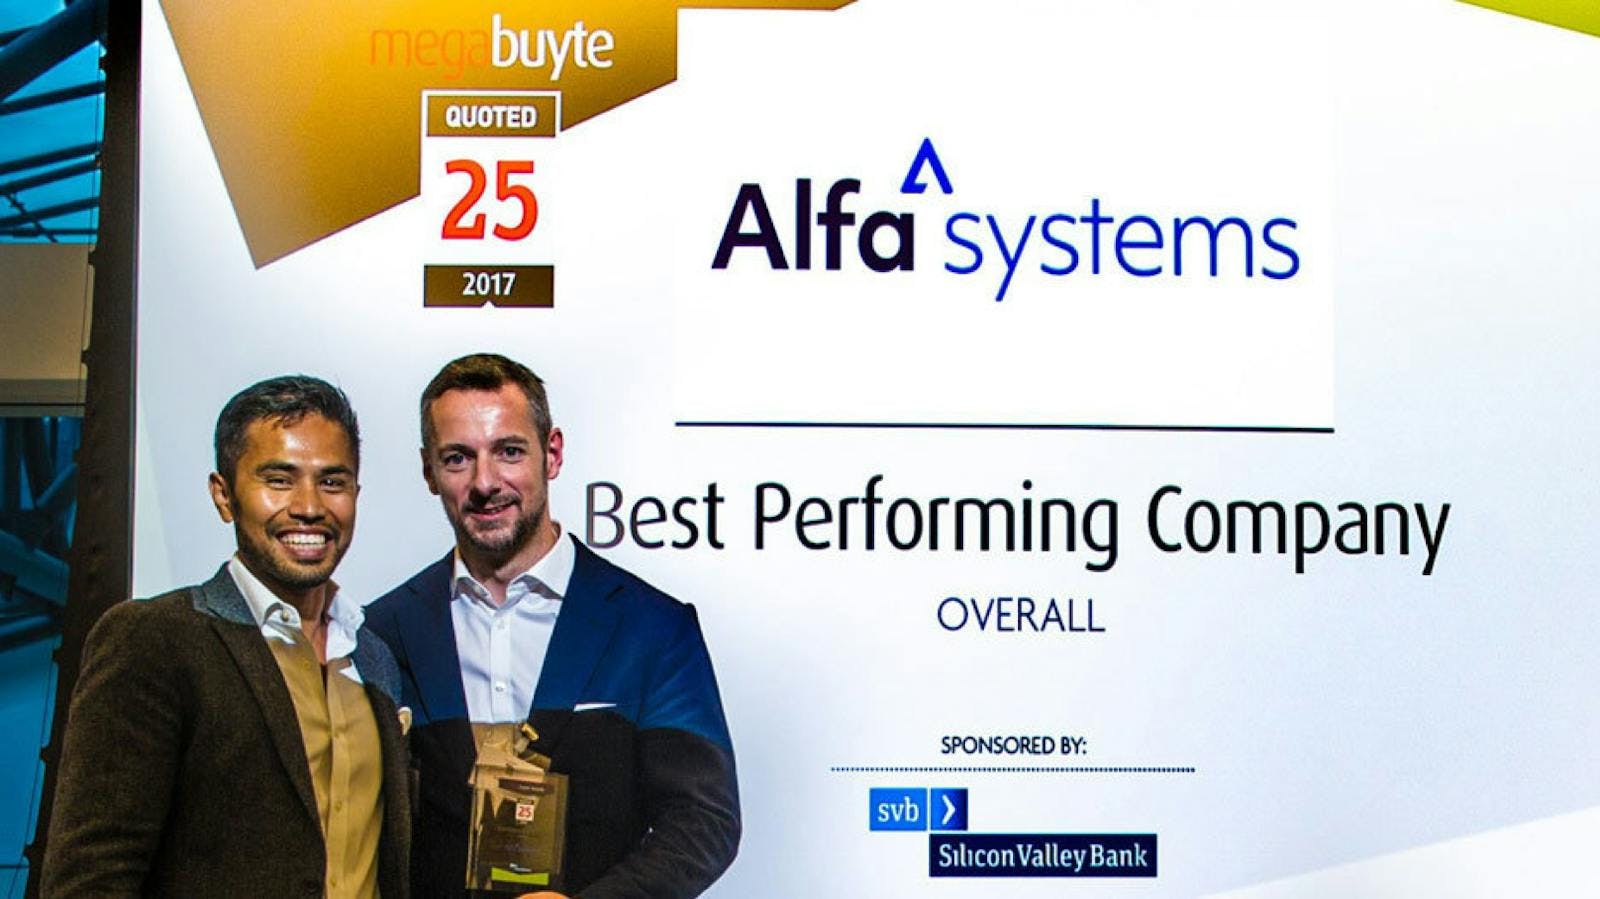 Alfa CEO Andrew Denton collecting the award for Best Performing Company overall